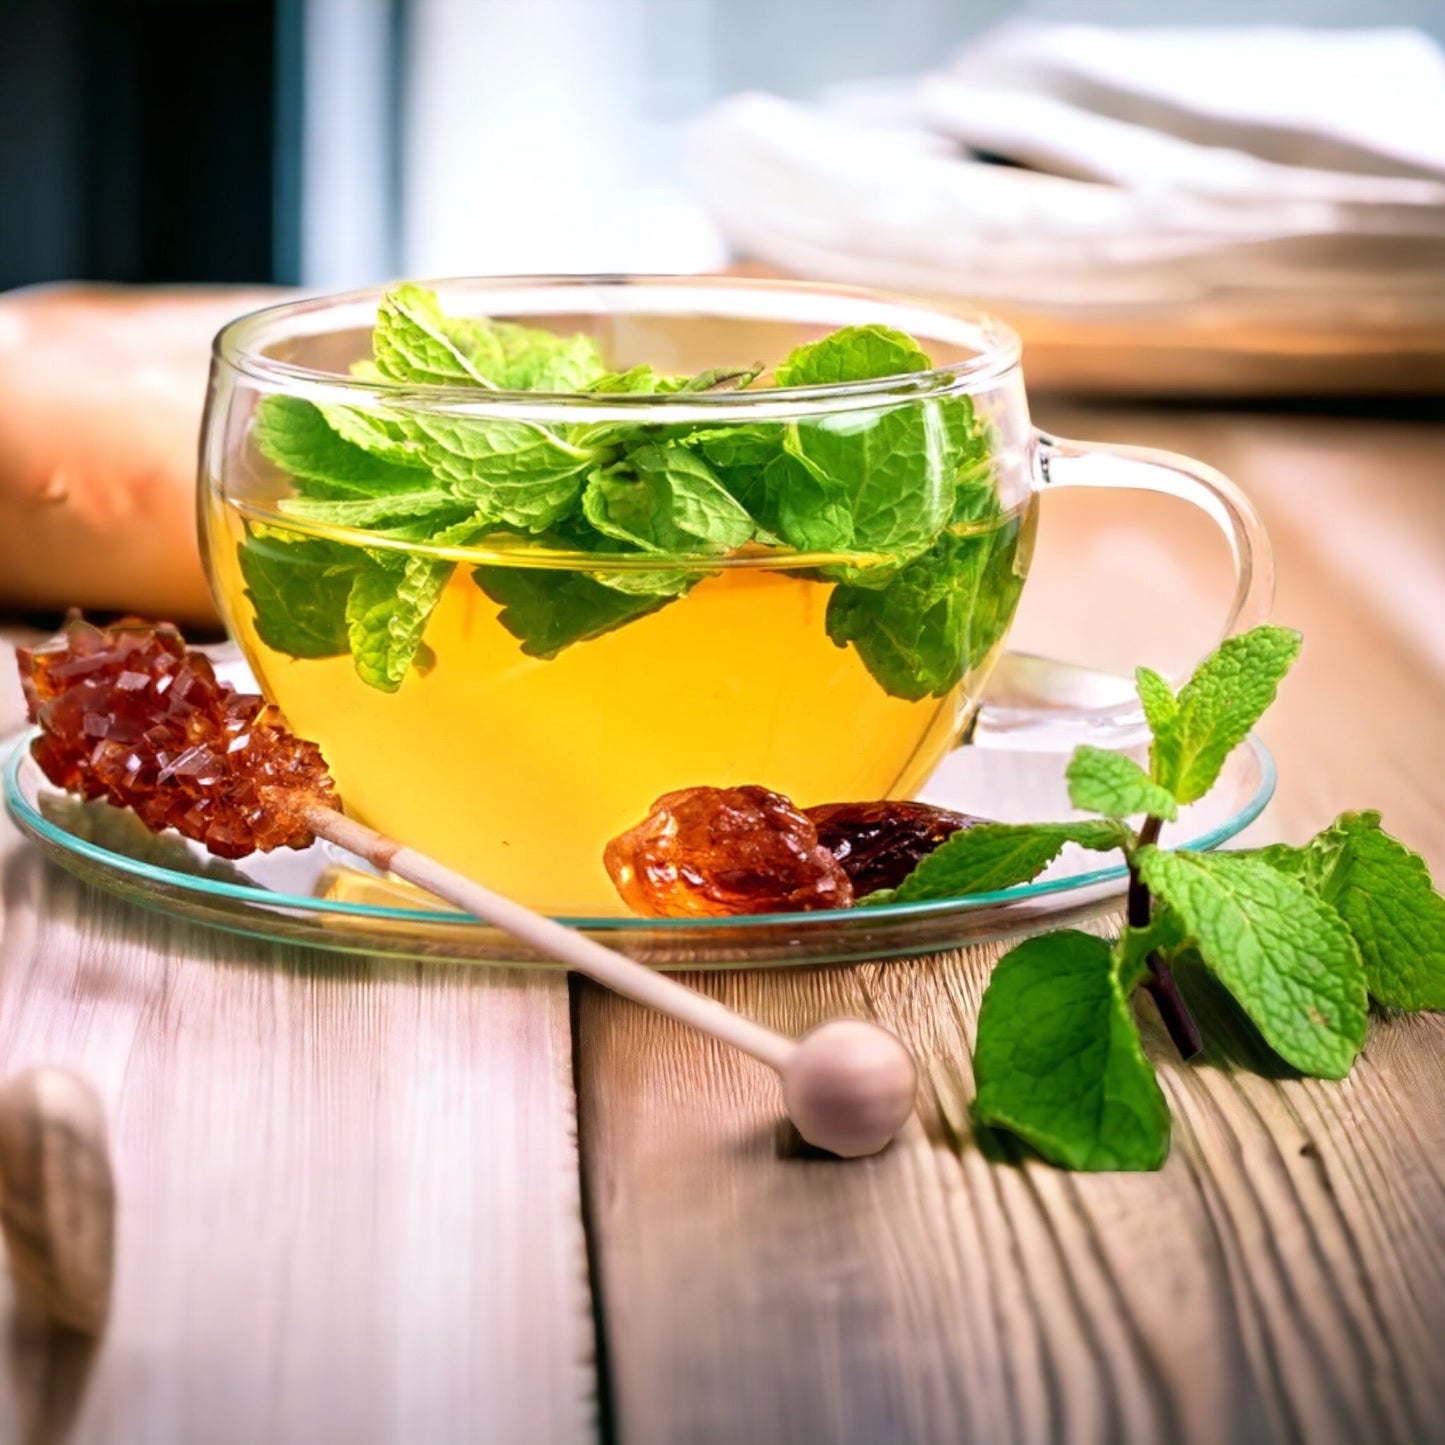 A glass of Jaroma Peppermint tea. Bright yellow colour accompanied with fresh leaves of green mint. 